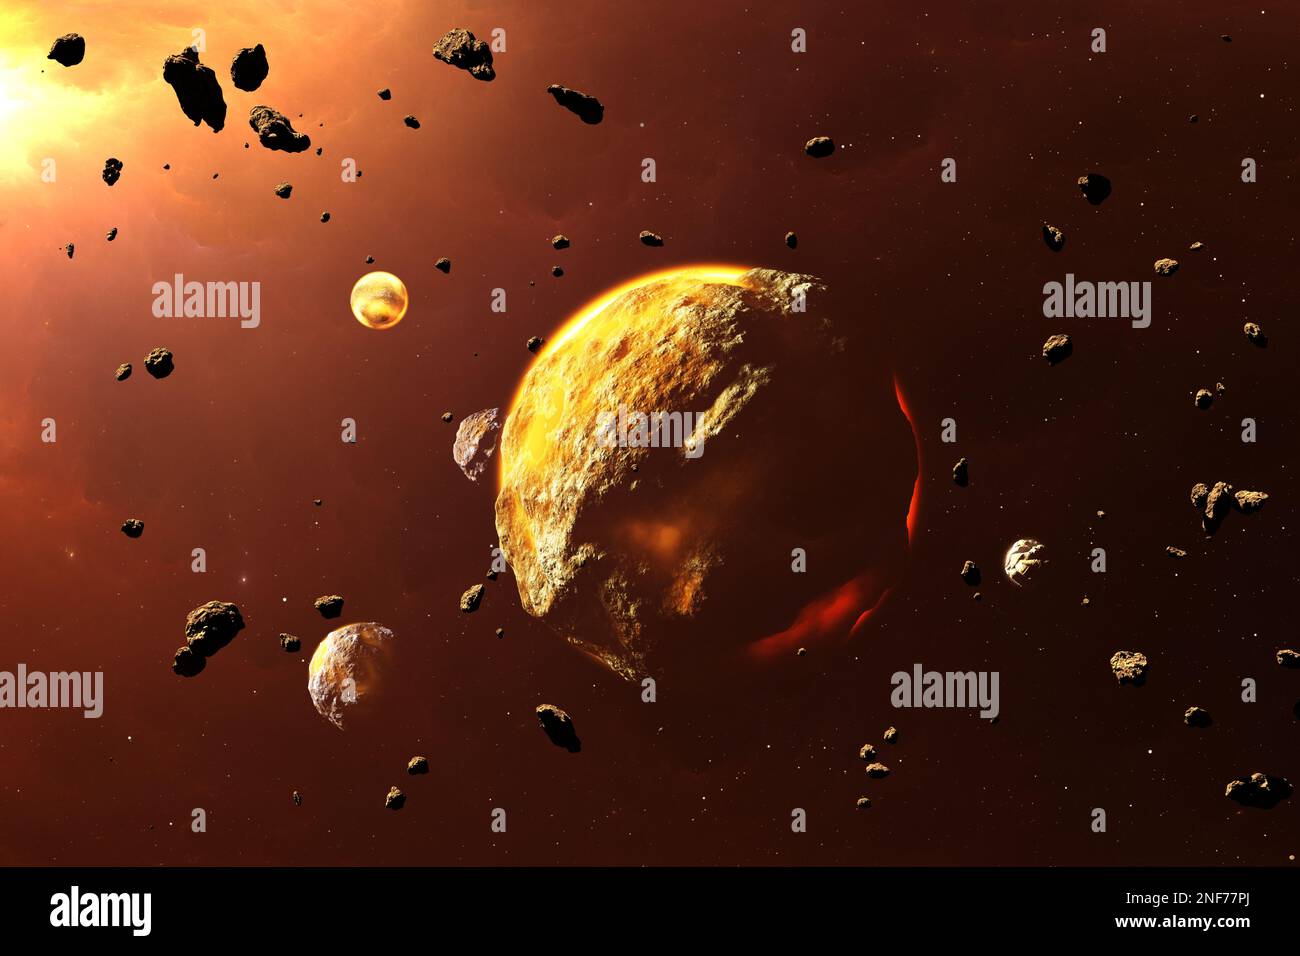 Newly forming protoplanets, planetesimals. Evolution by the process of accretion. 3d illustration Stock Photo